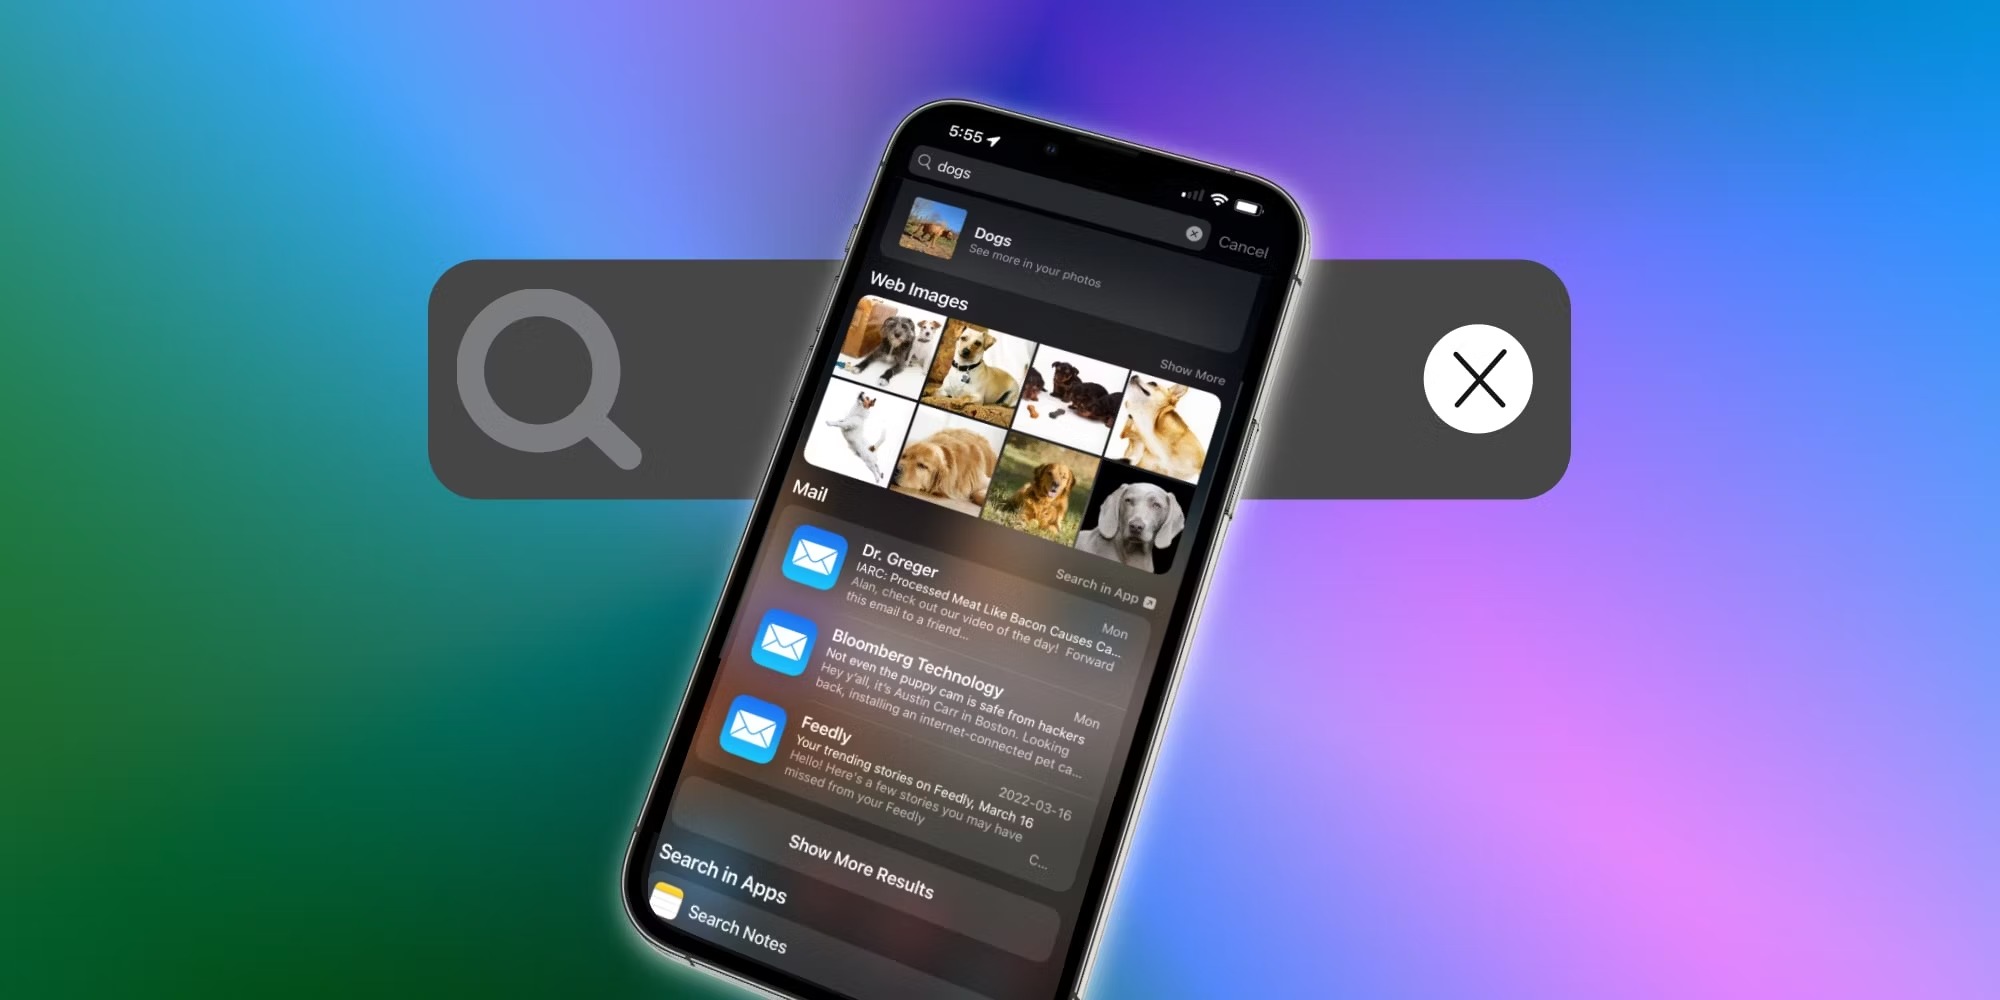 How To Search Your iPhone Using Spotlight